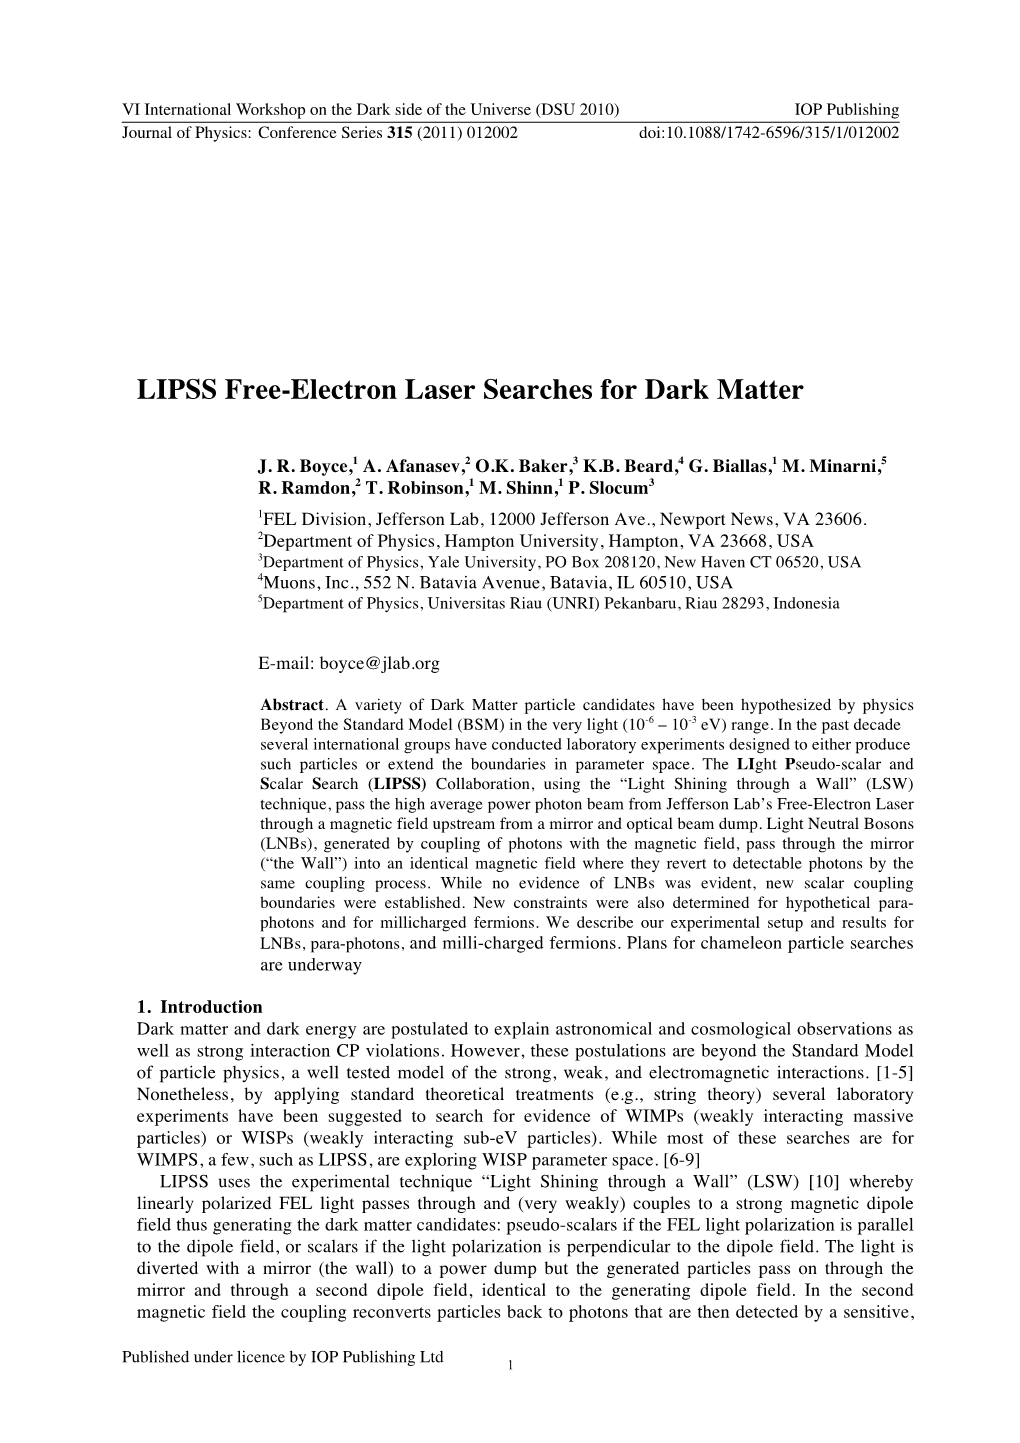 LIPSS Free-Electron Laser Searches for Dark Matter